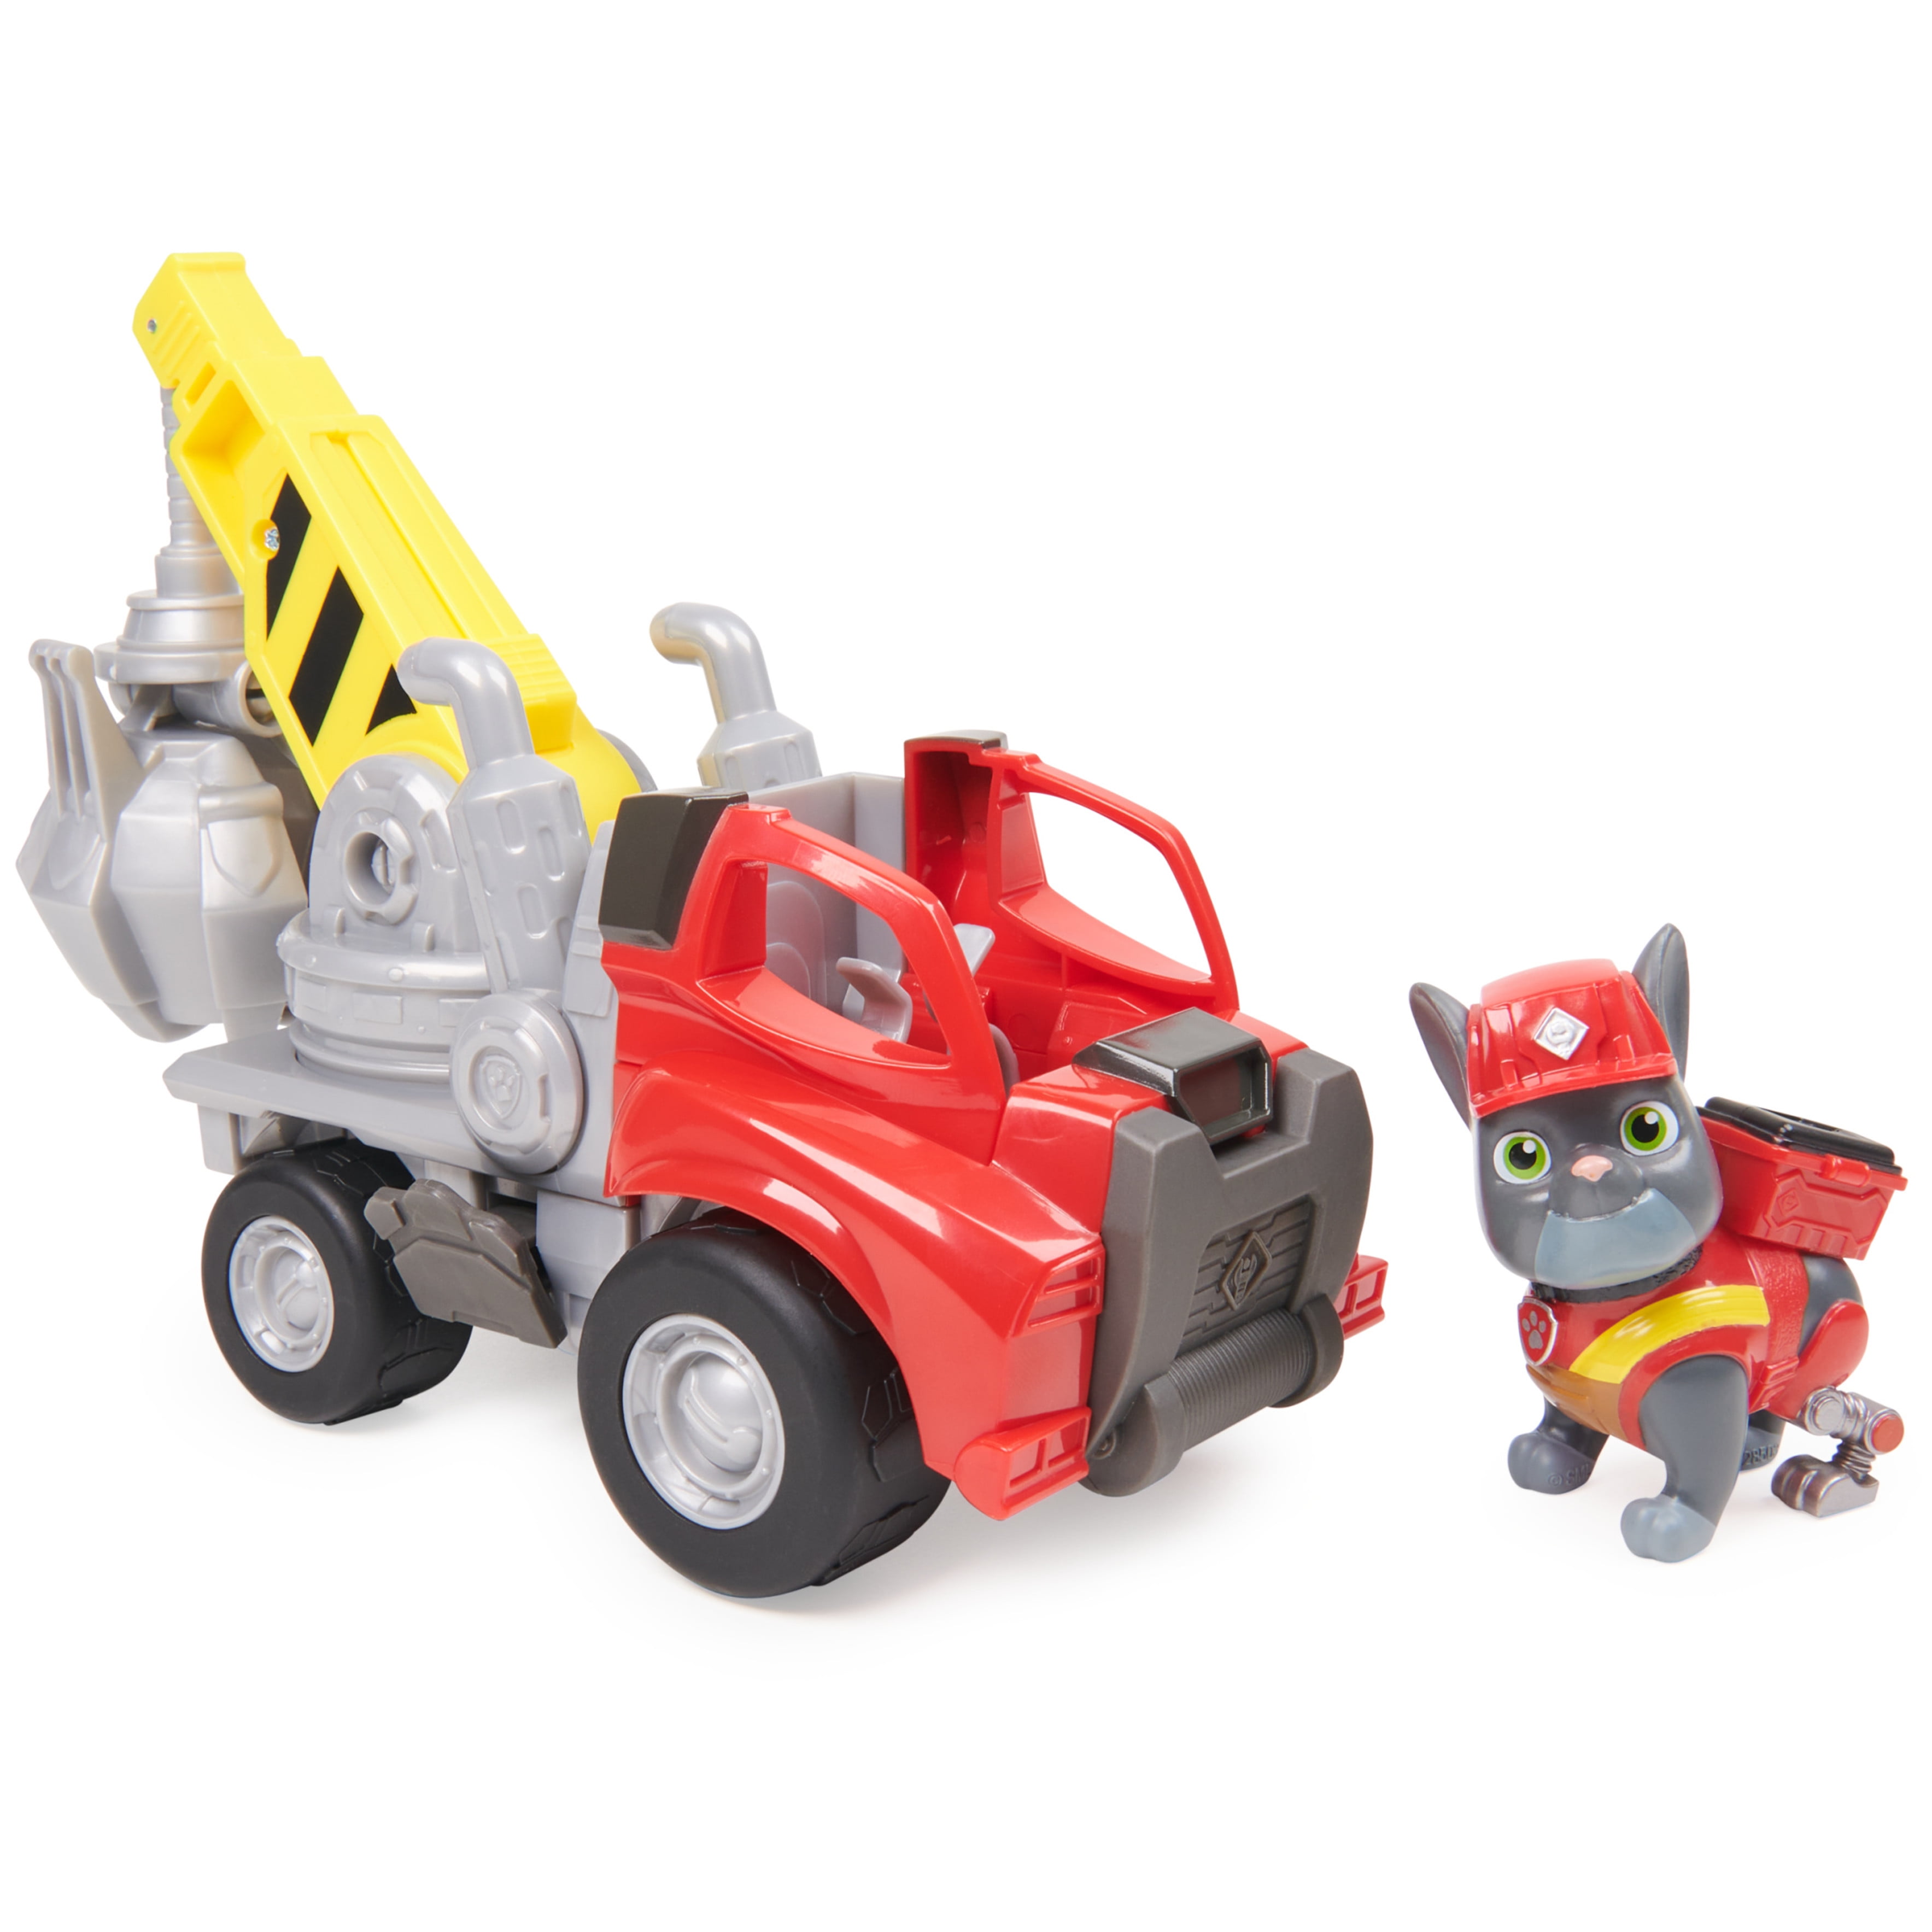 Rubble & Crew, Crane Grabber Toy Truck with Charger Action Figure, Toys for Kids Ages 3+